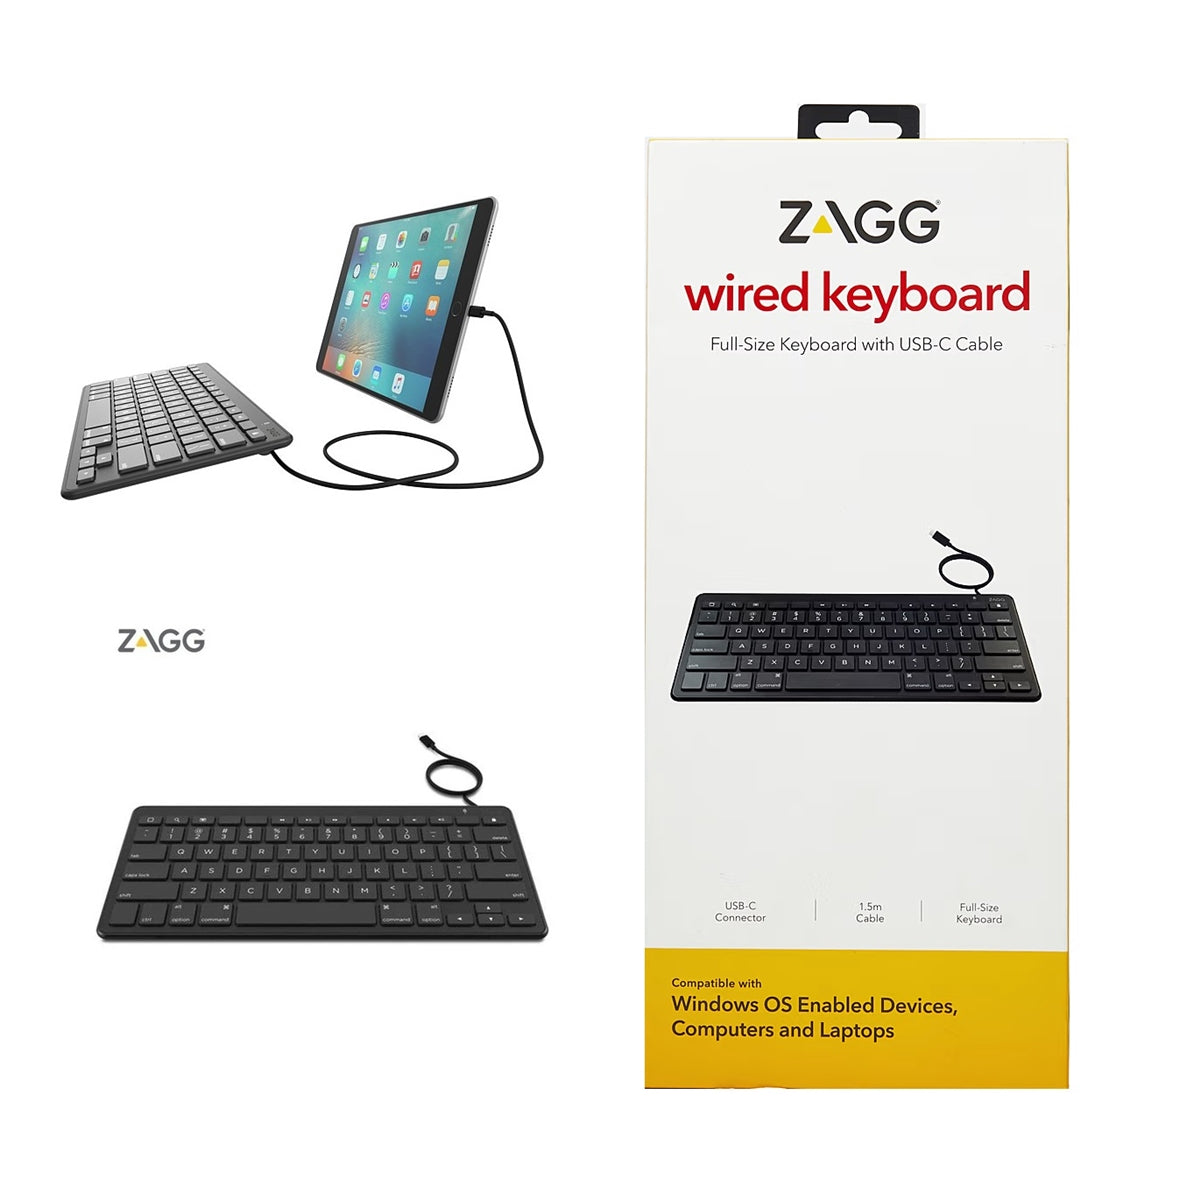 ZAGG Wired Keyboard Lightning Connector for iPhone iPad MFi-Certified-www.firsthelptech.ie